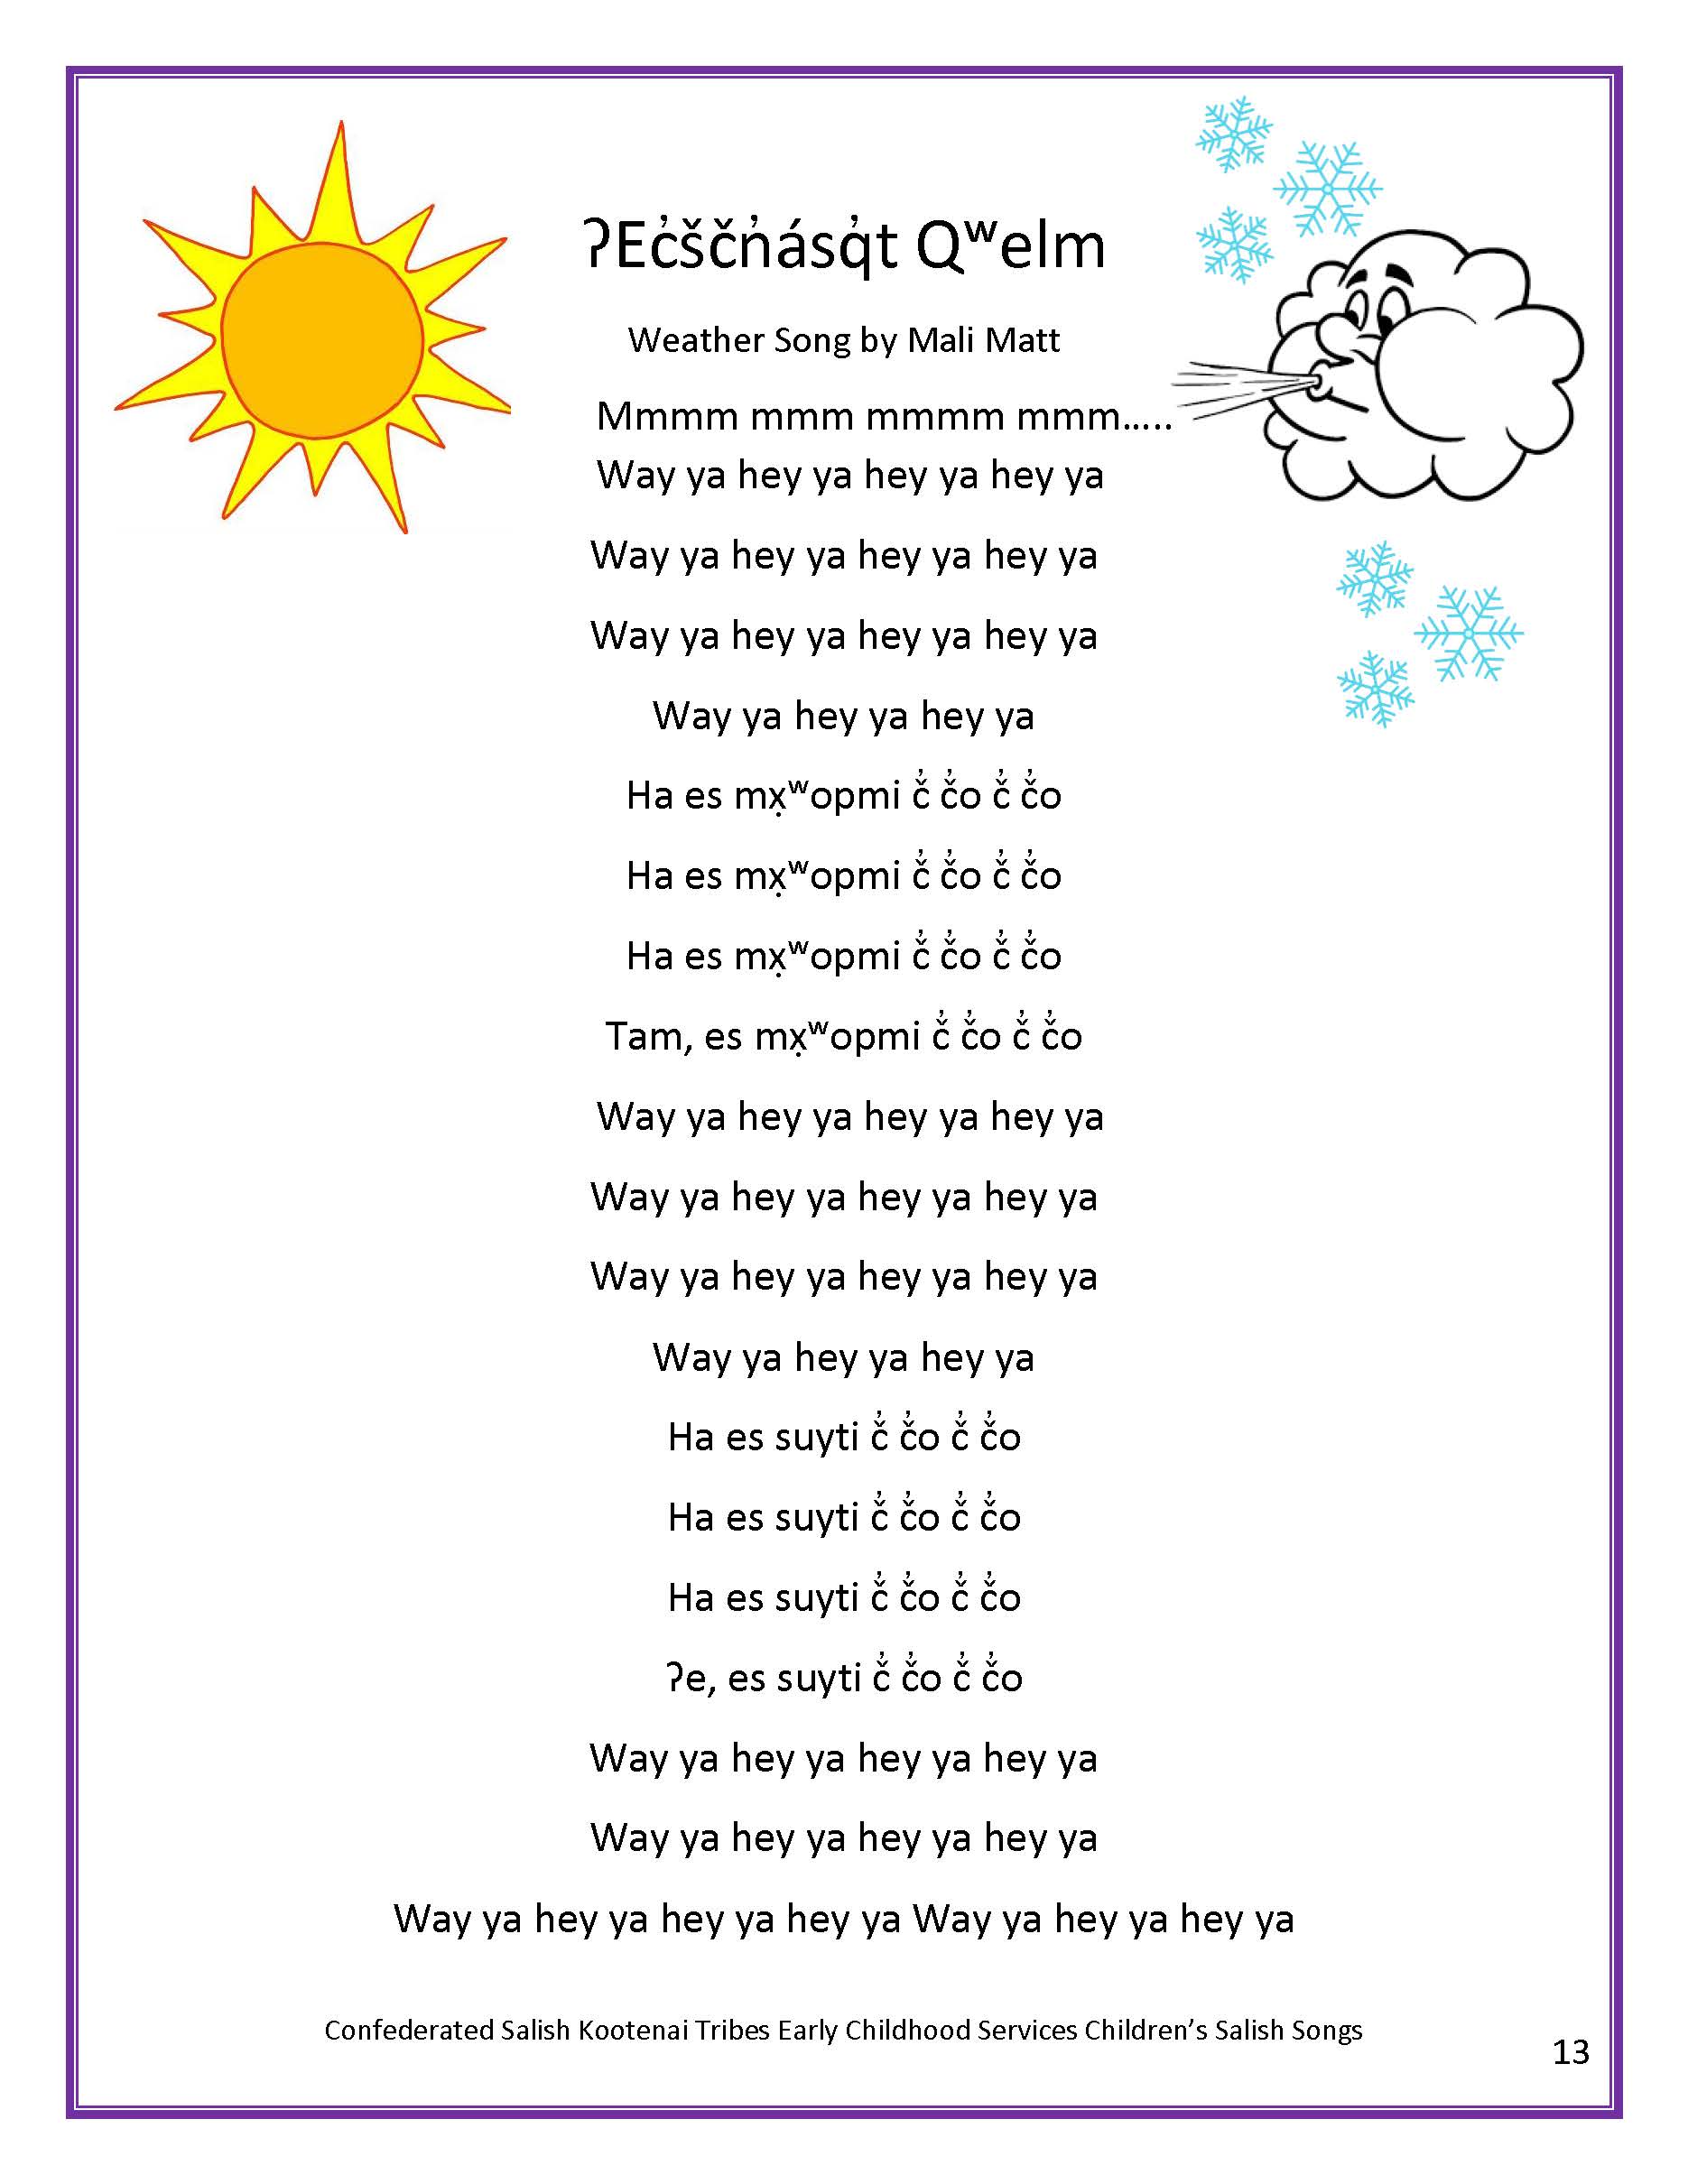 ECS Childrens Salish Song Book Page 18